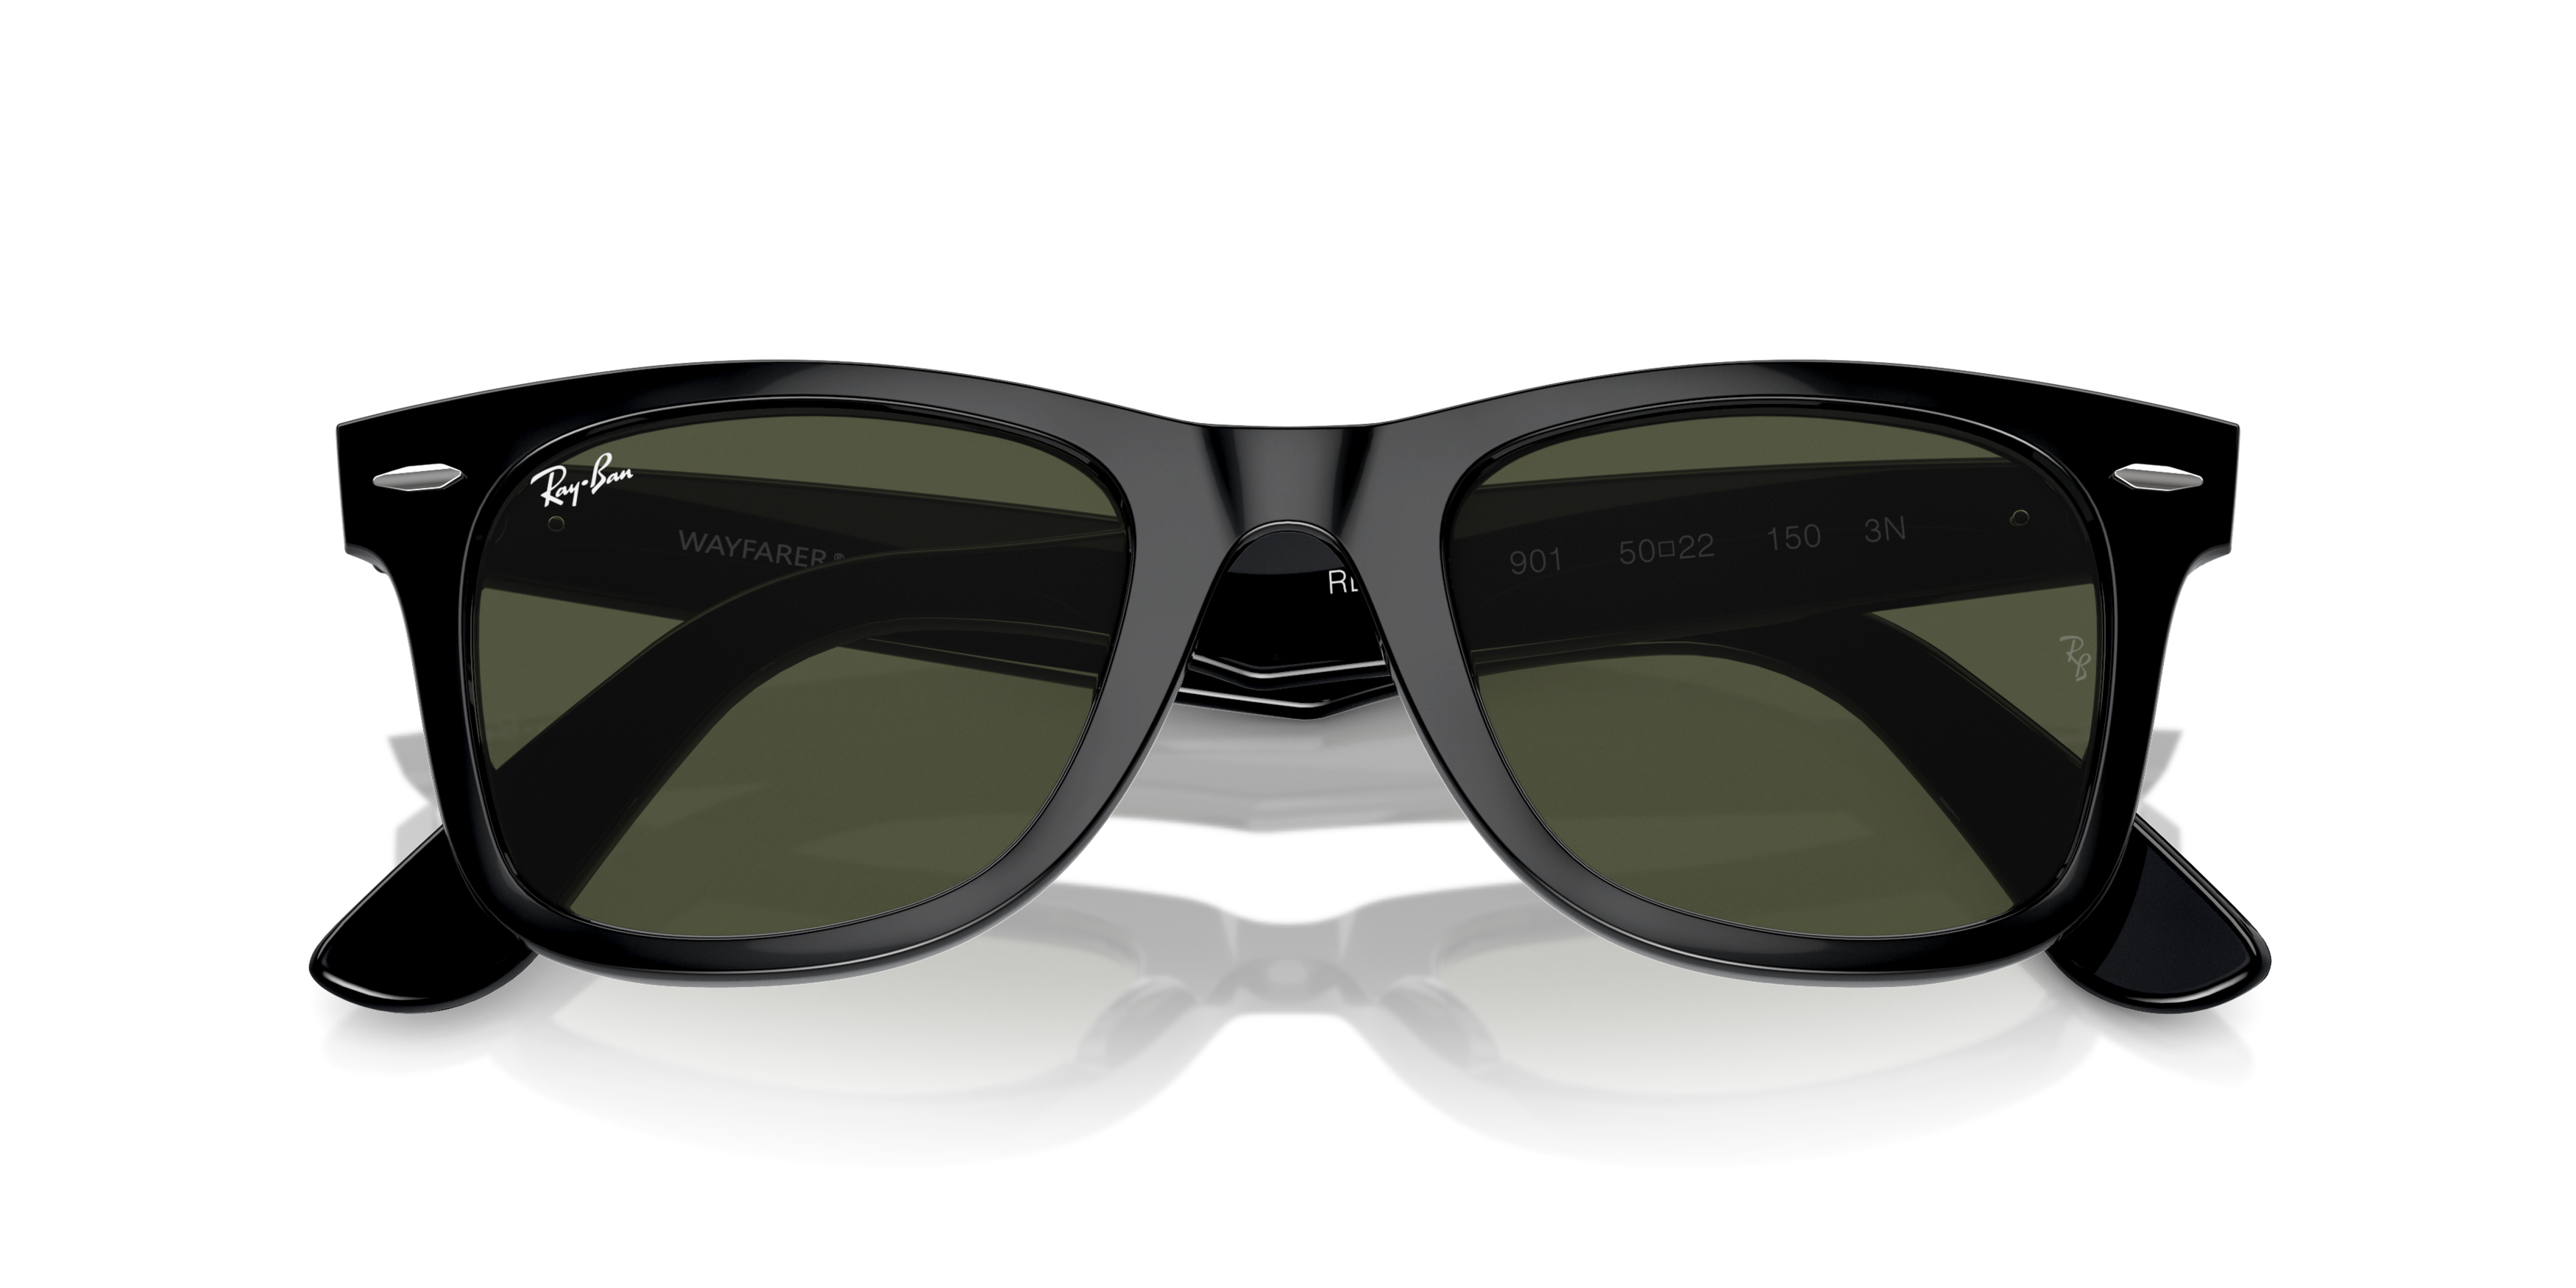 [products.image.folded] RAY-BAN RB2140 901